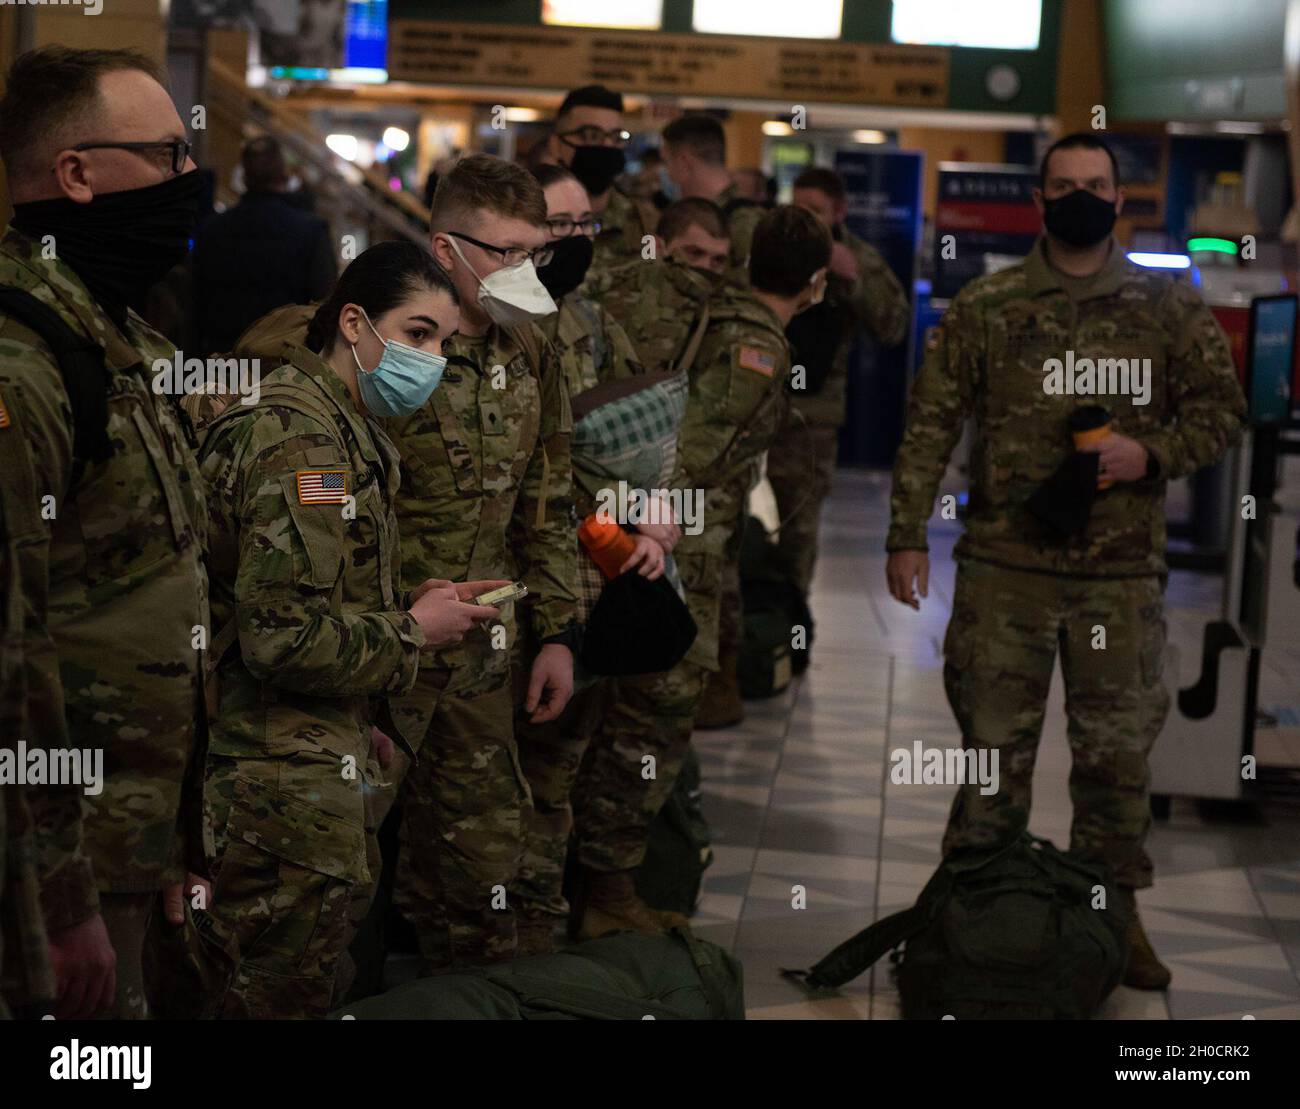 Soldiers with the Vermont National Guard's 172nd Law Enforcement Detachment wait to check their bags at Burlington International Airport in South Burlington, Vermont, Jan. 26, 2021. The Soldiers will deploy to the U.S. European Command area of responsibility to support Operation Freedom's Sentinel. Stock Photo